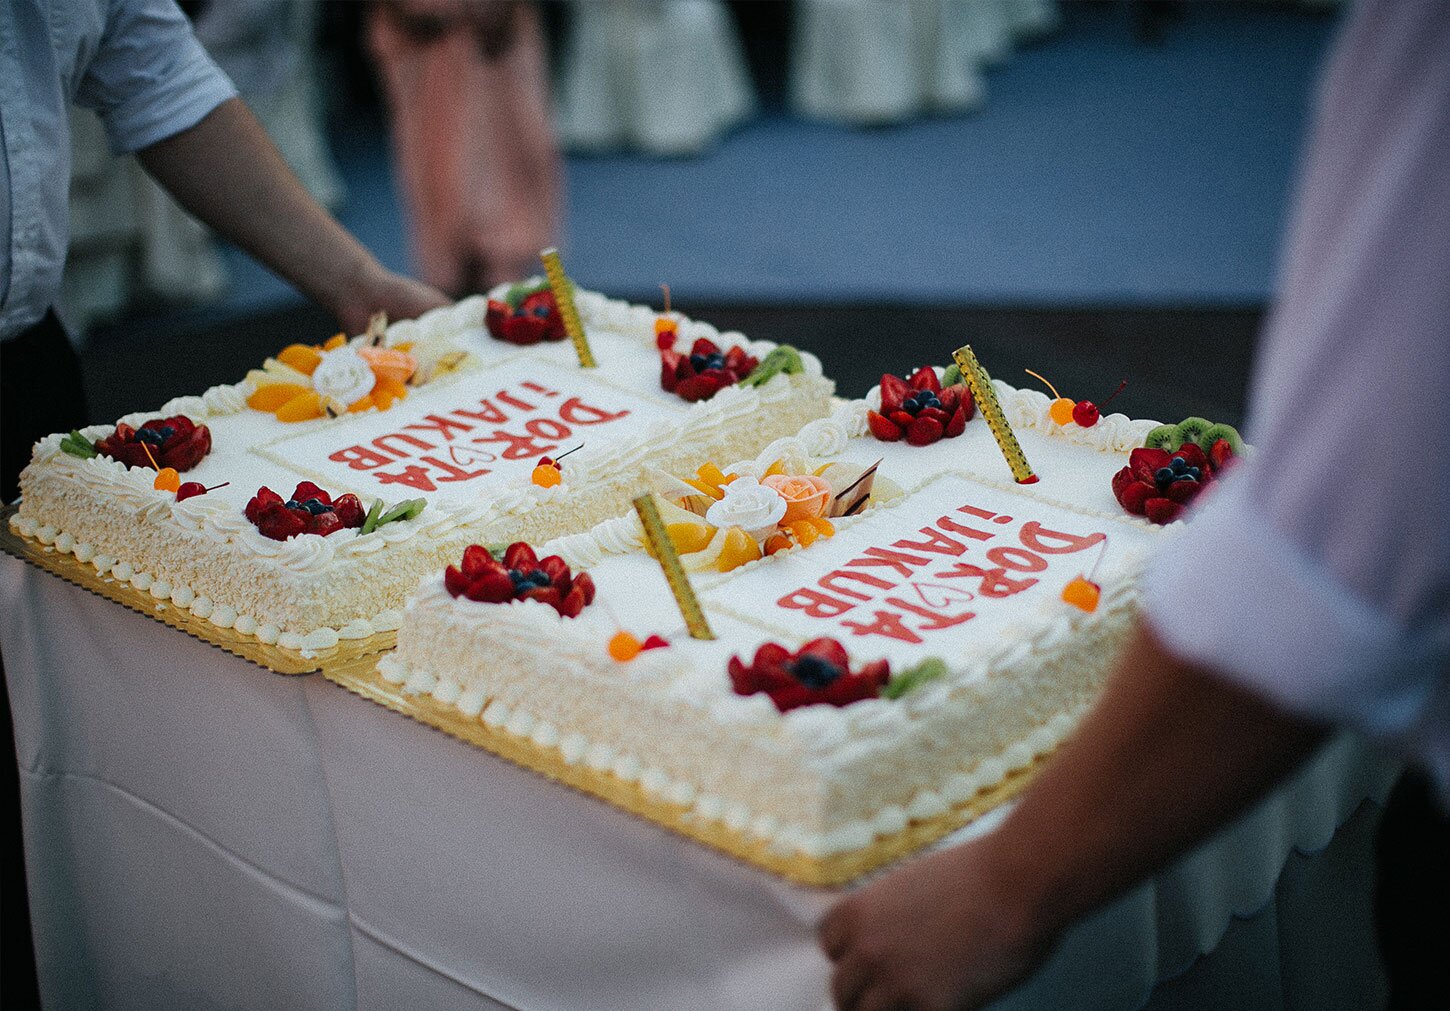 Photography of the wedding cake with the main typographic motive on it